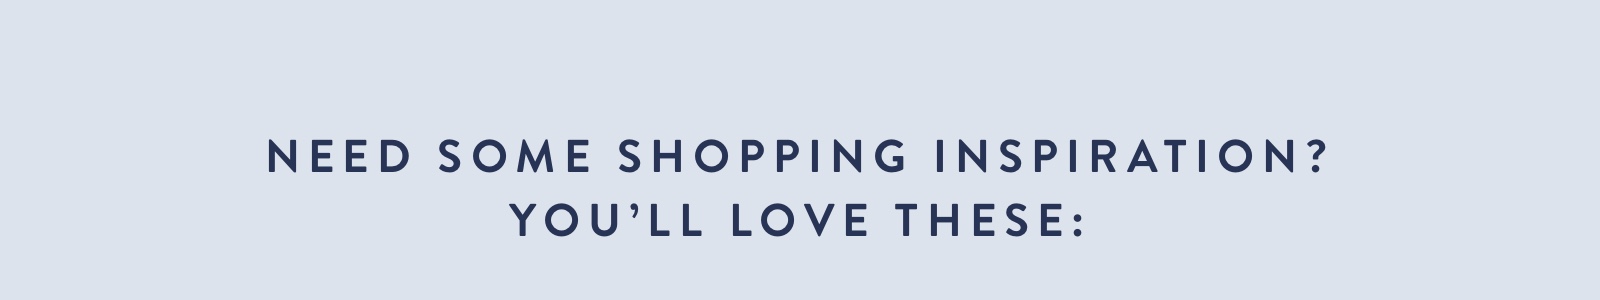 Need some shopping inspiration? You''ll love these